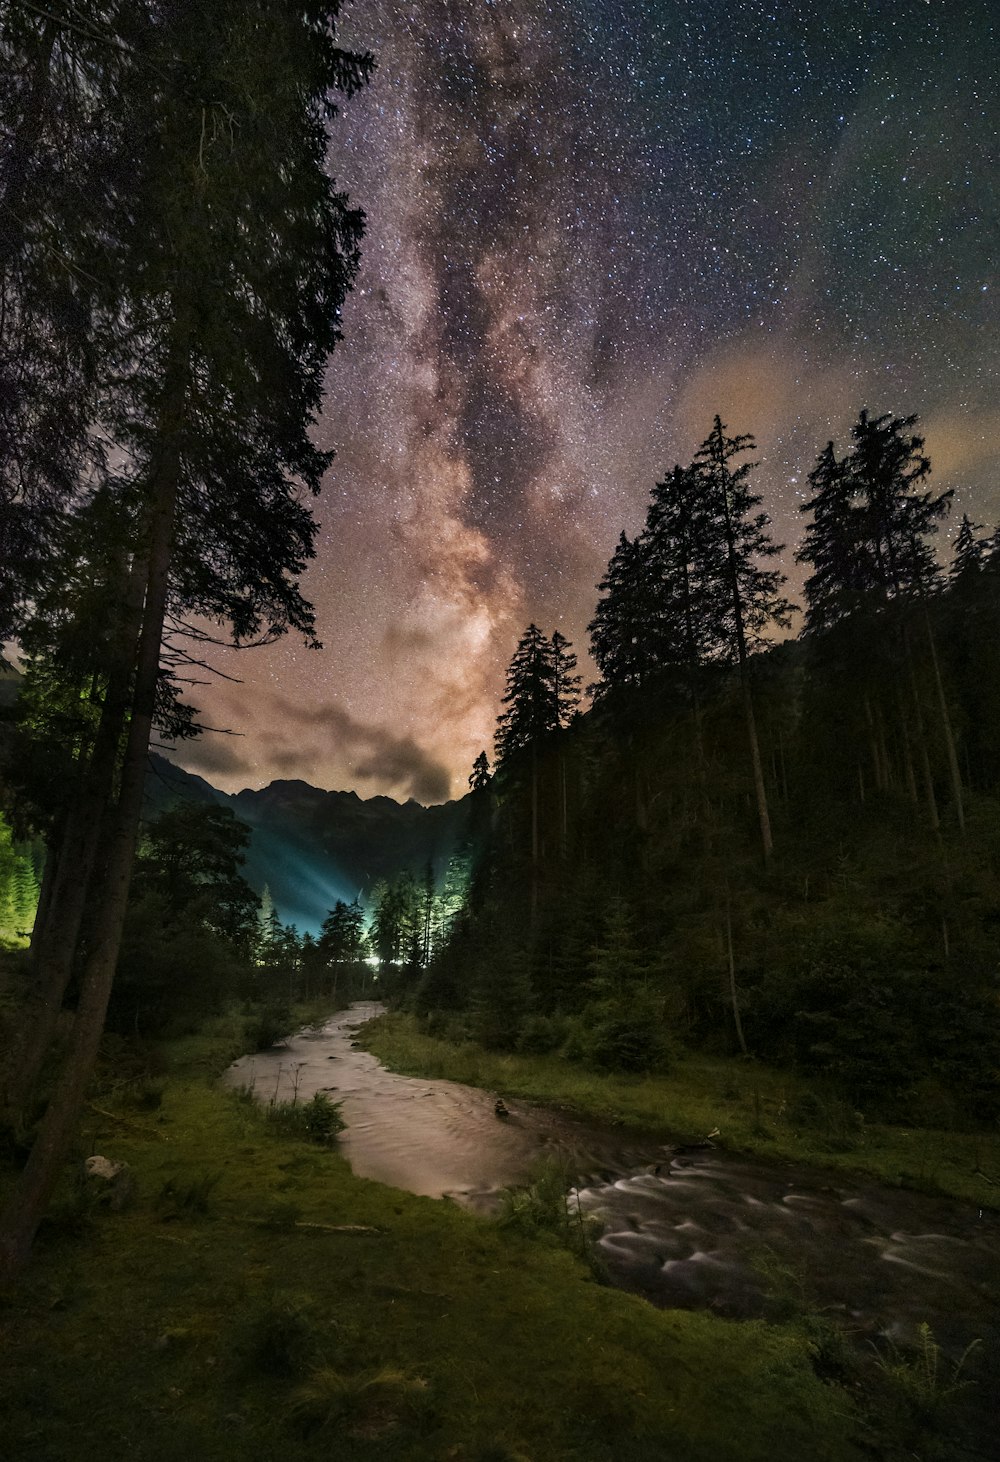 a river running through a lush green forest under a night sky filled with stars